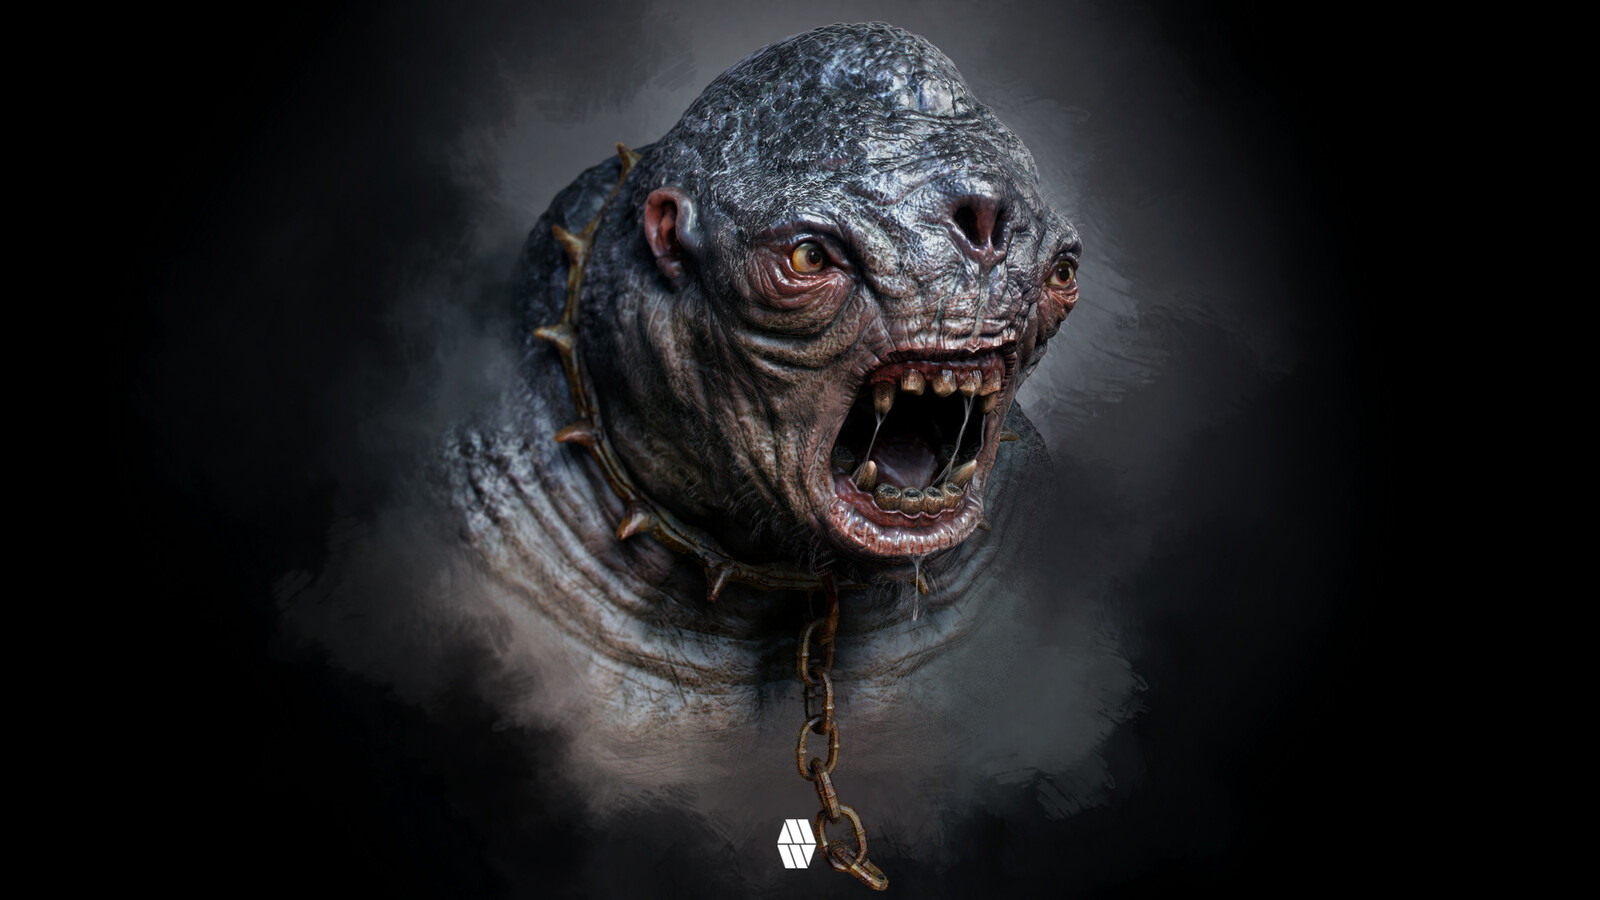 Troll Bust Concept - Personal Project 'Orcs of Middle Earth' 